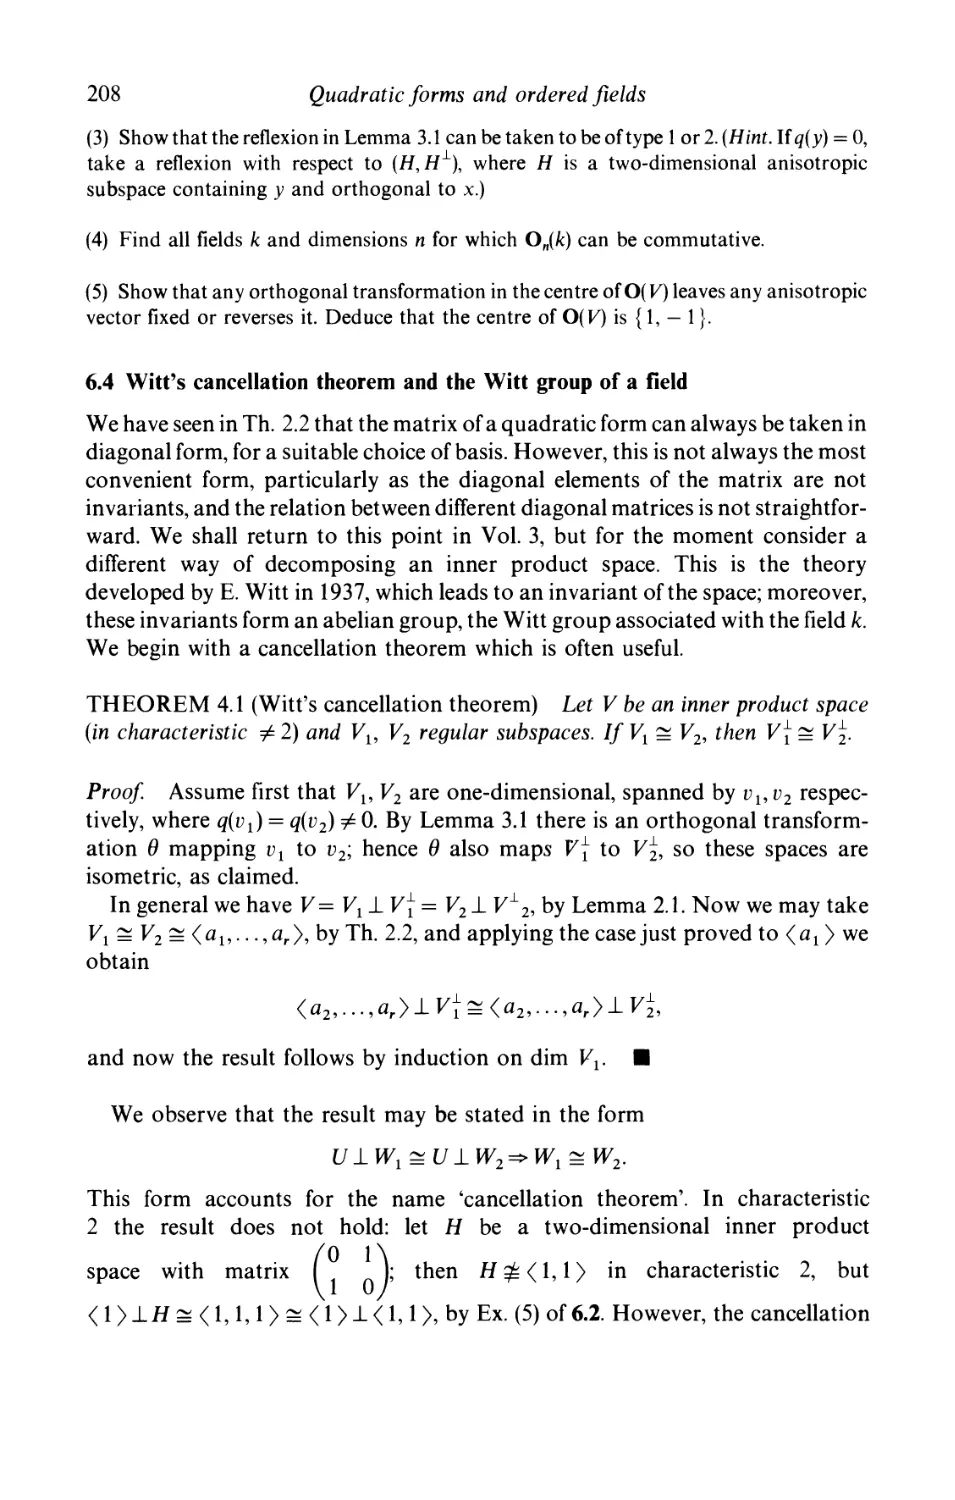 6.4 Witt's cancellation theorem and the Witt group of a field